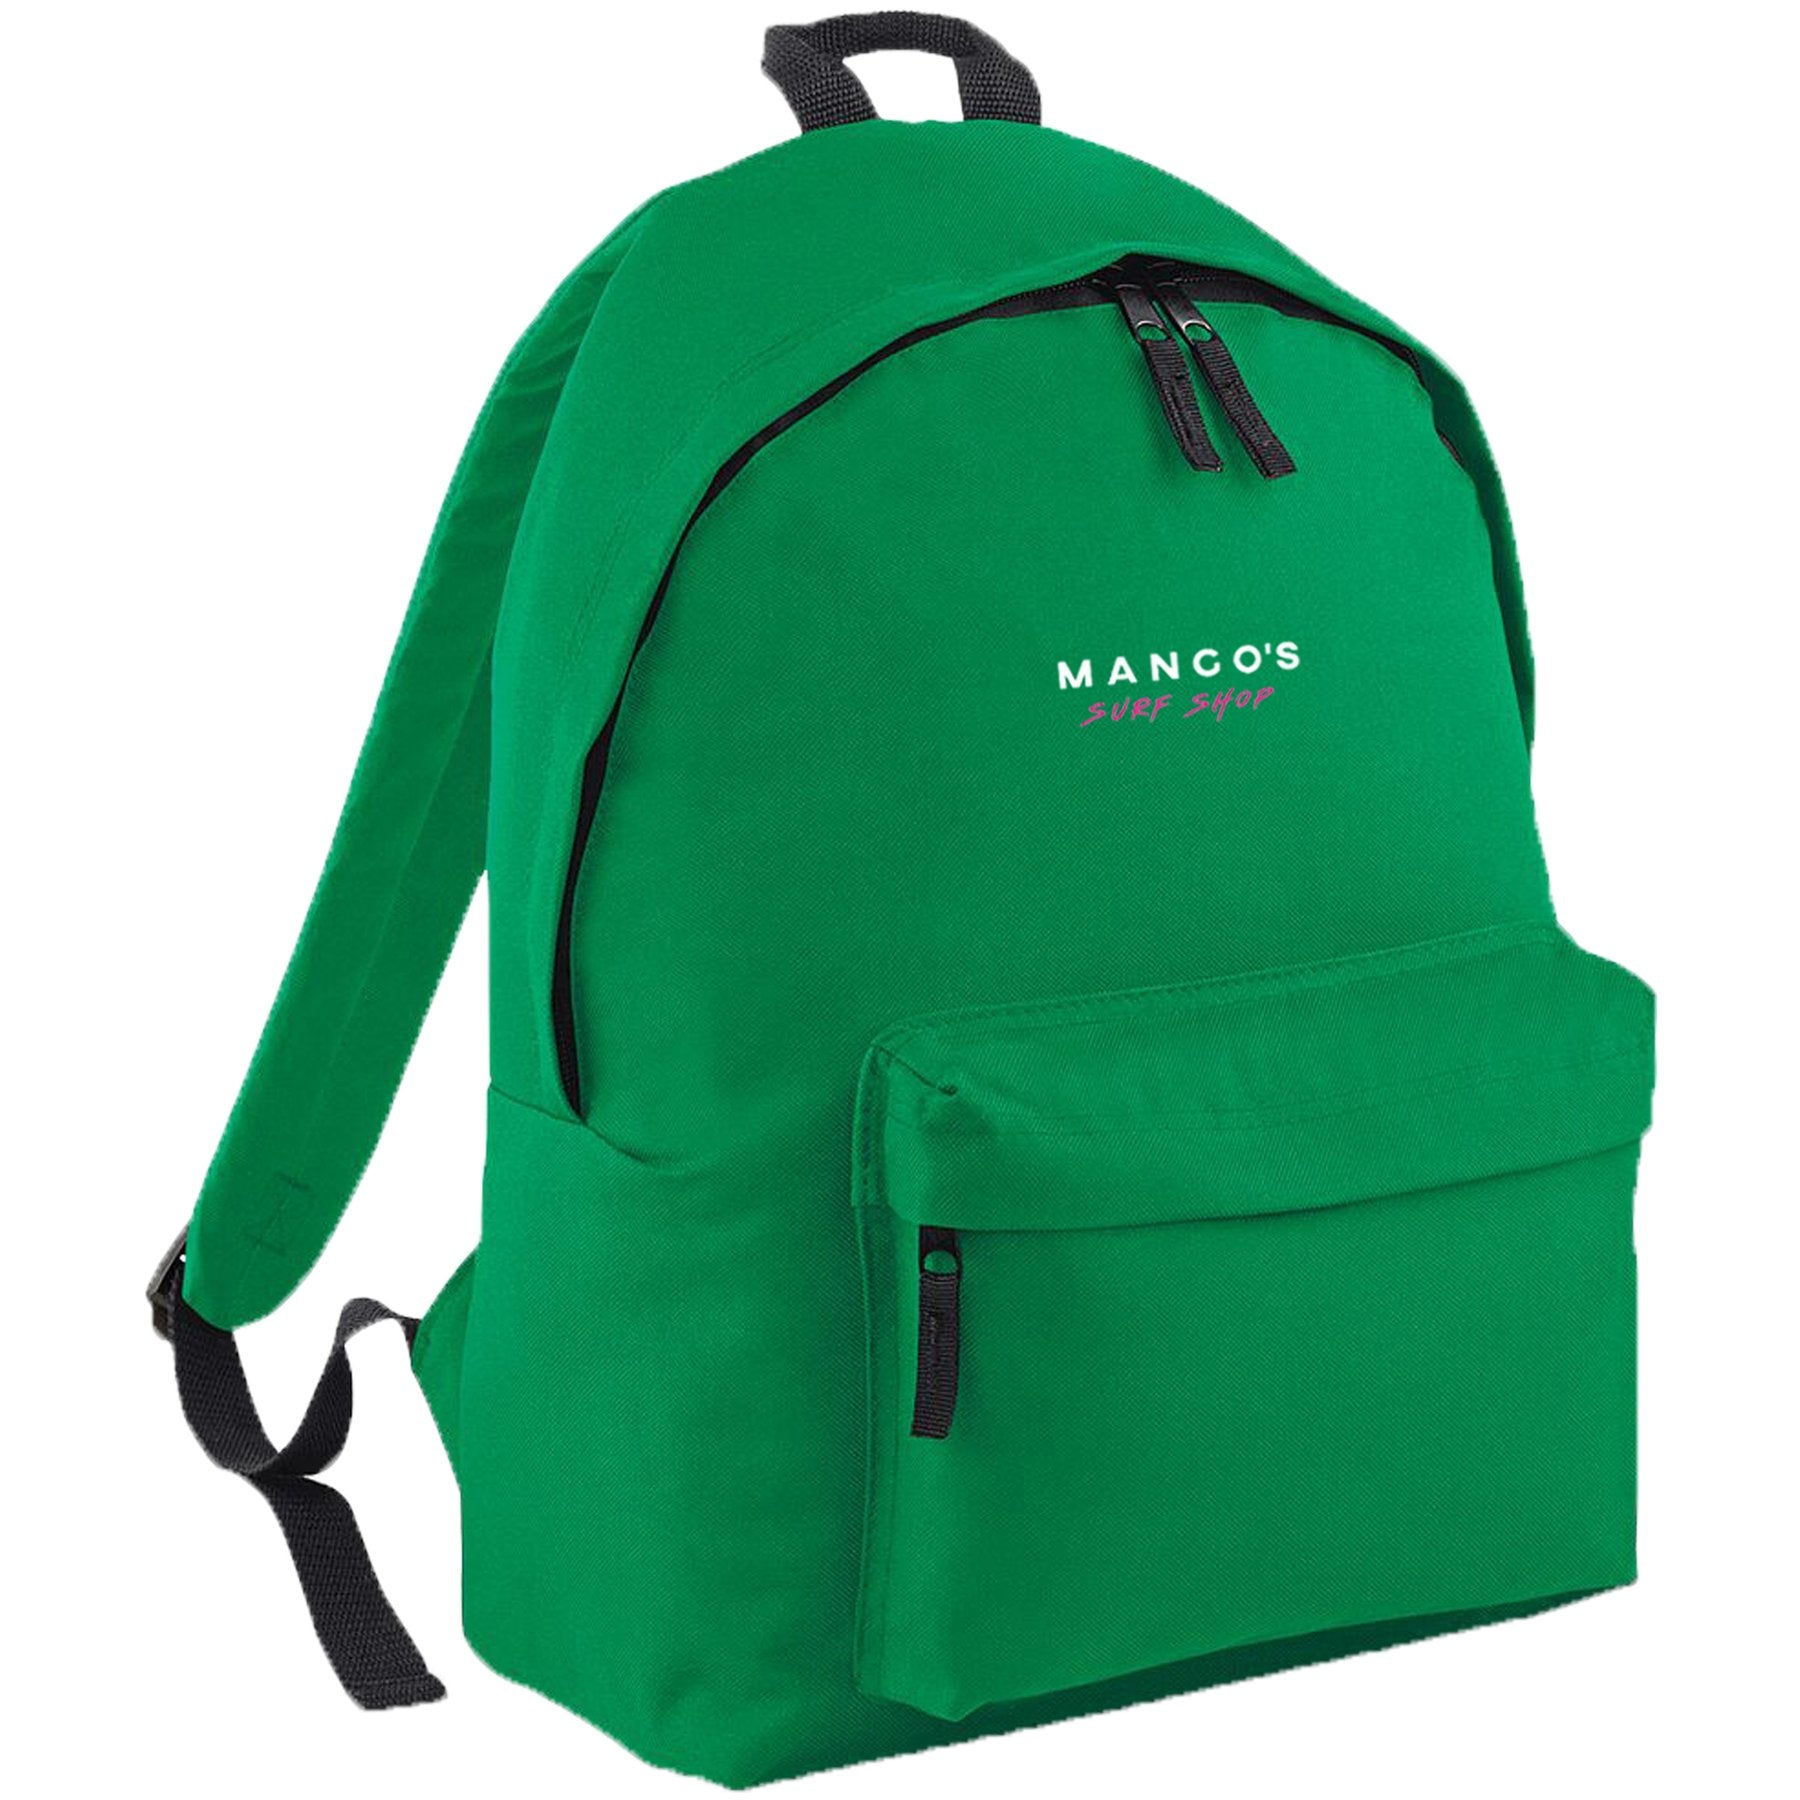 Surf Shop, Surf Clothing, Mango Surfing, New Mango Backpack, Bags, Kelly Green